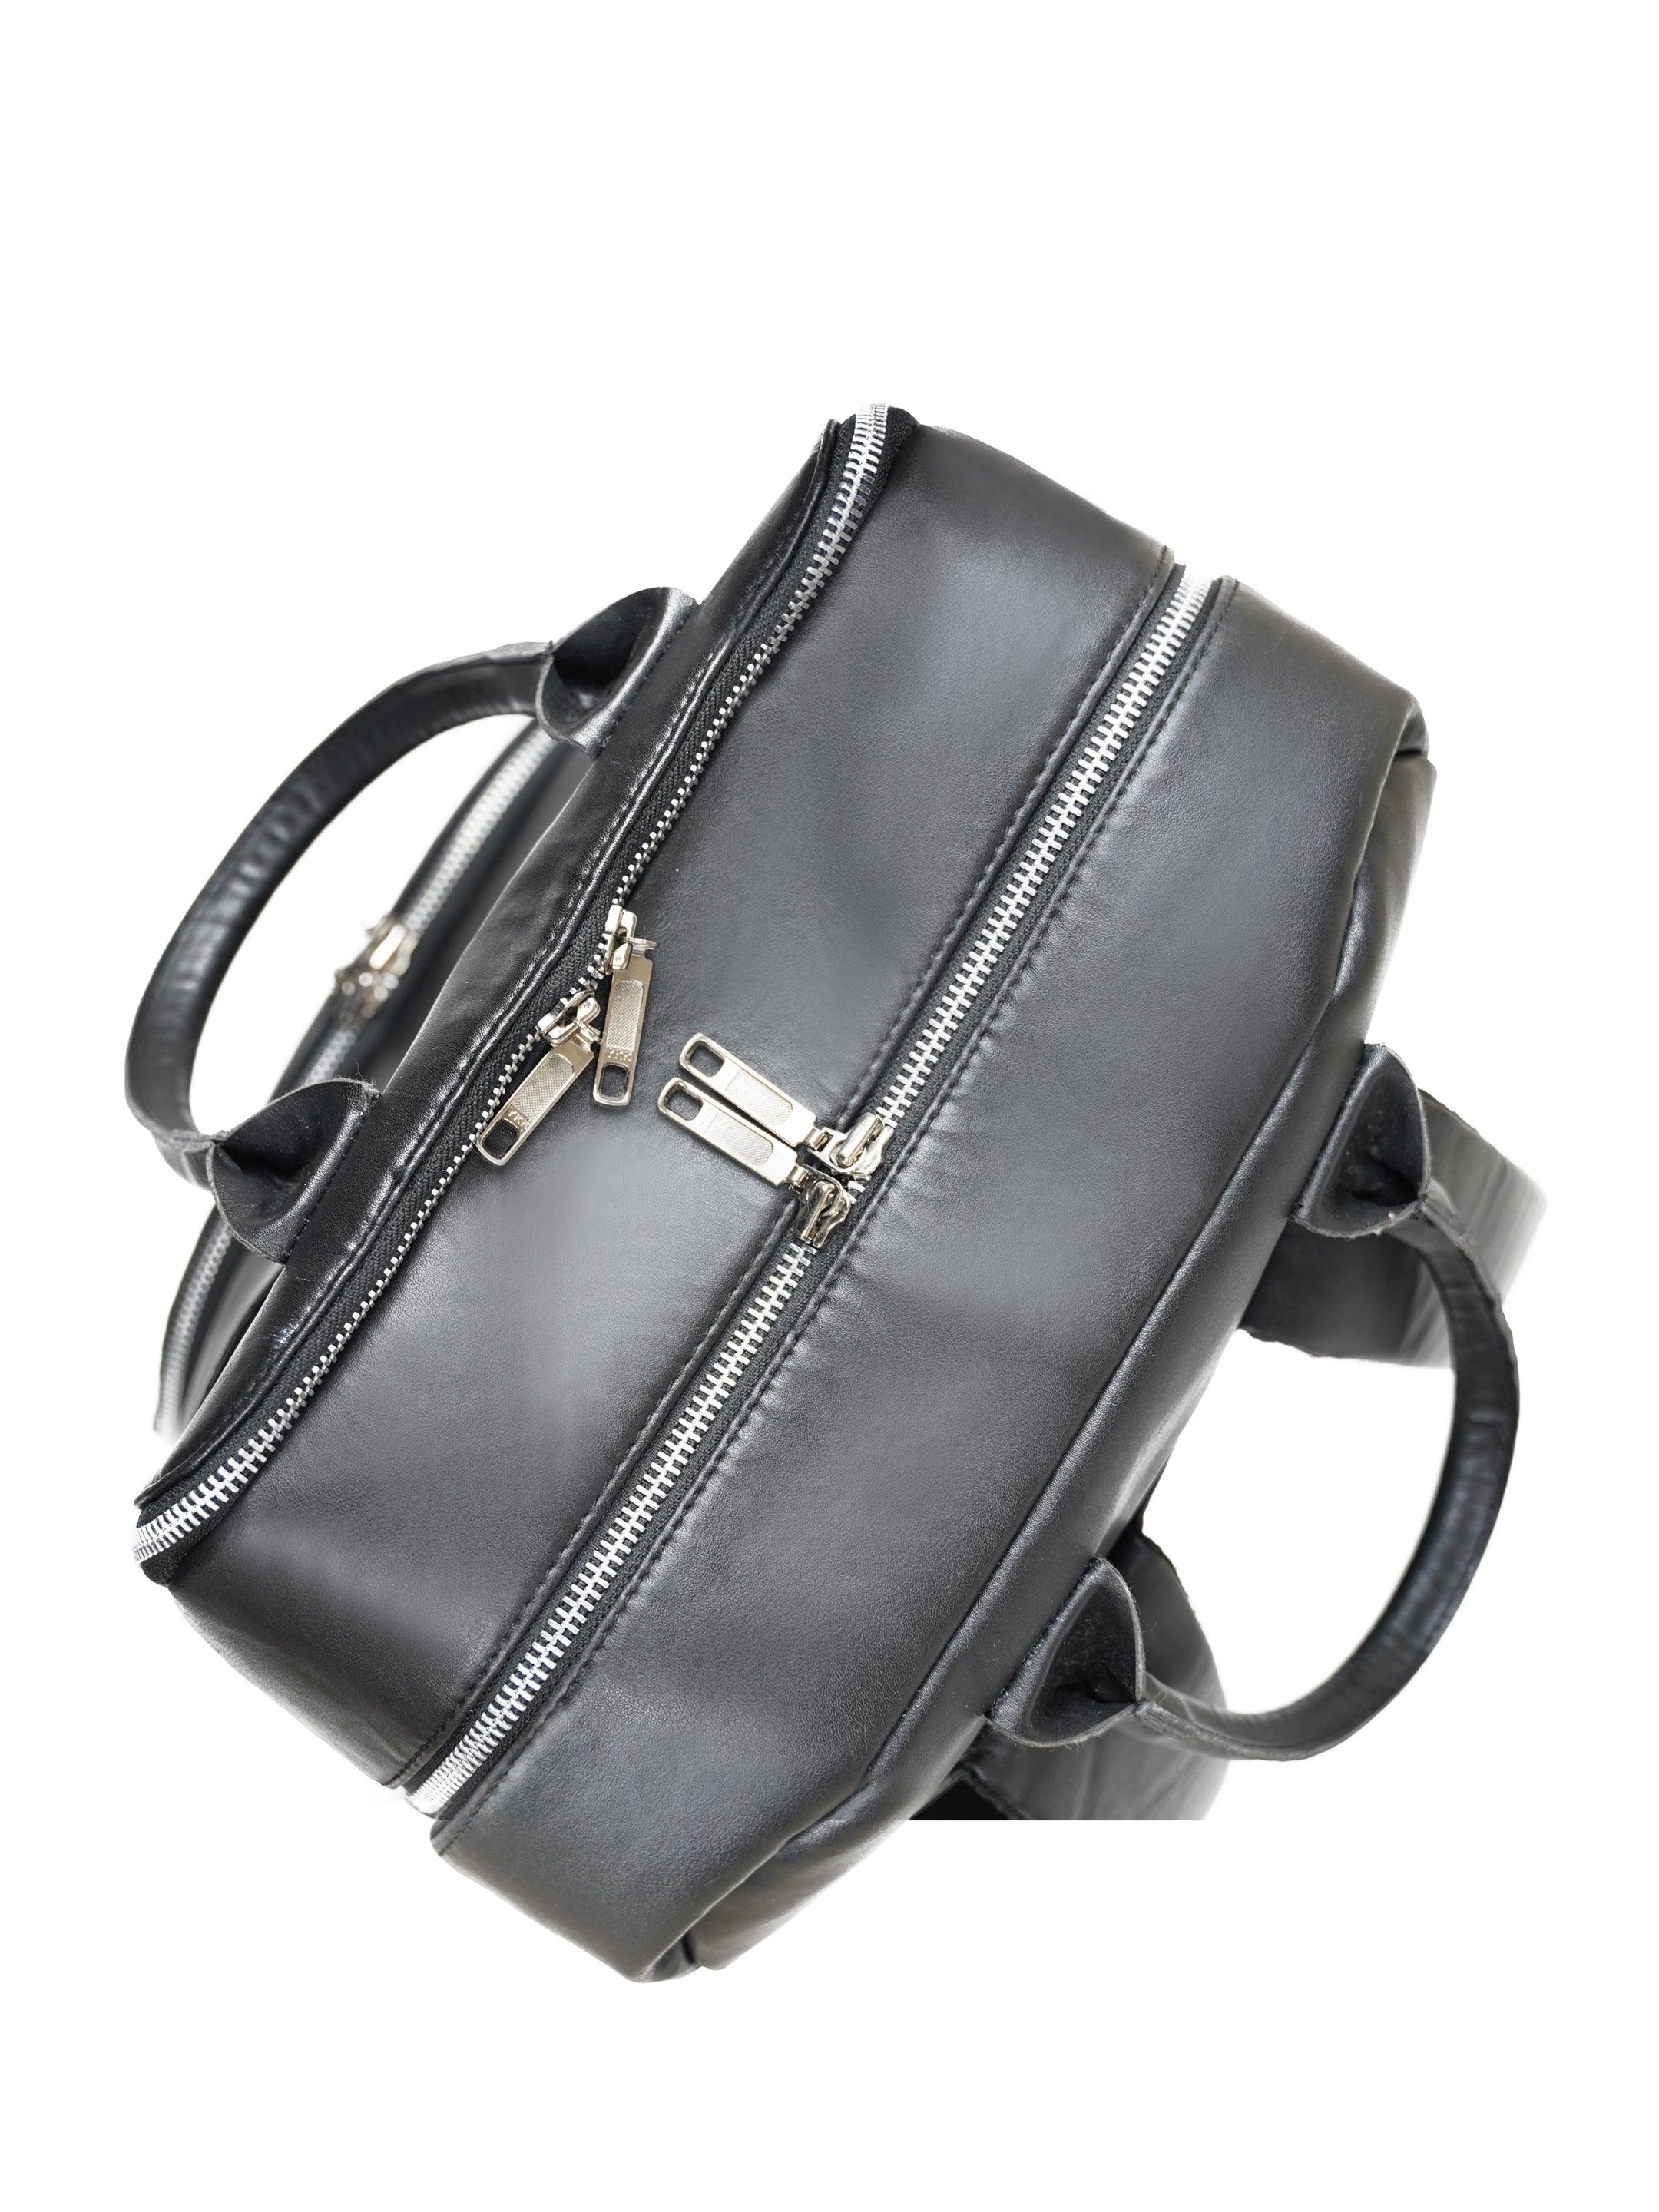 Vegan Leather Backpack with Dual Zippers